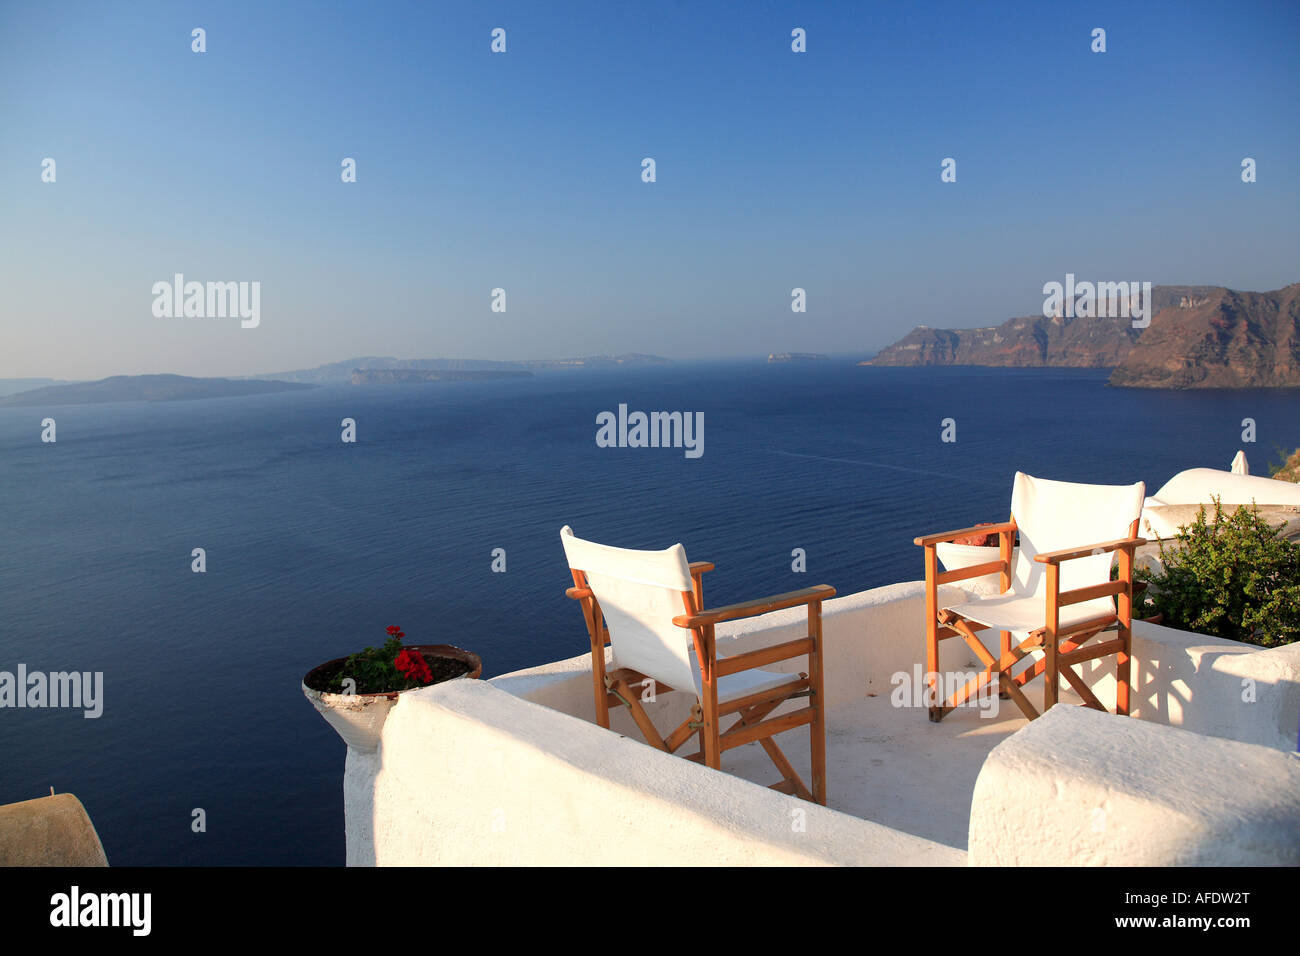 tranquil view of chairs on patio overlooking clear blue ocean Stock Photo